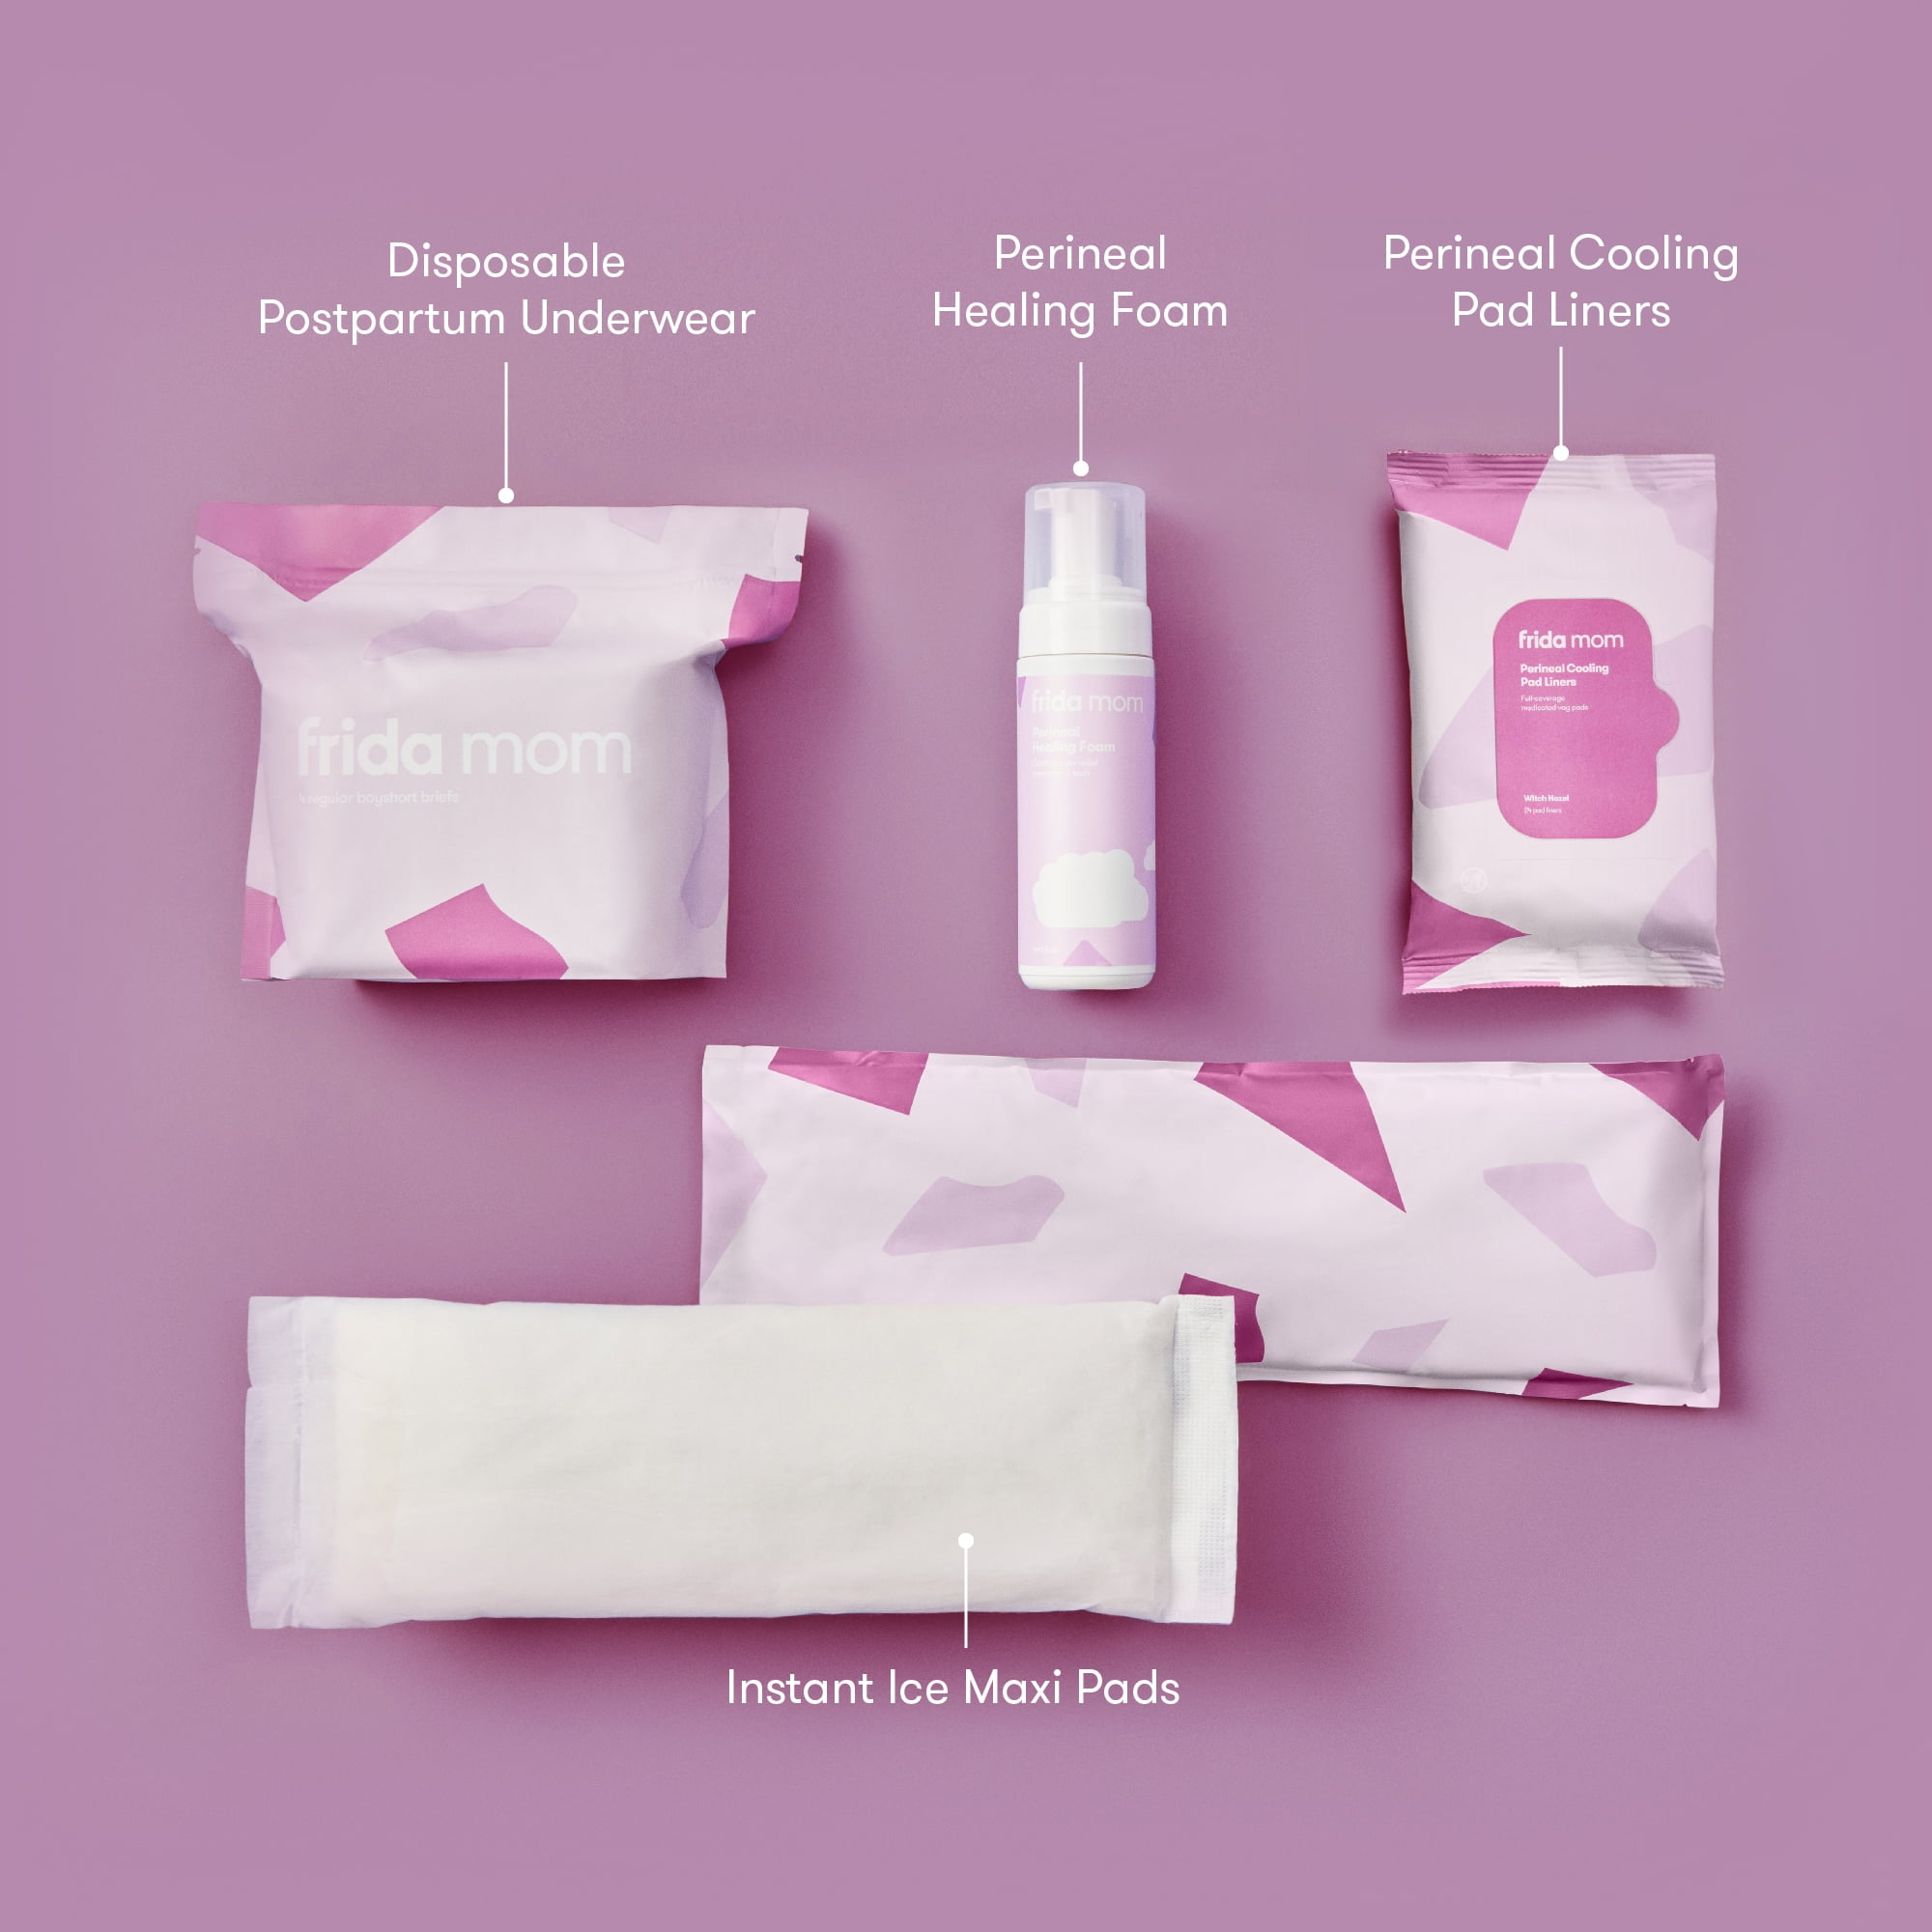 Frida Mom Postpartum Recovery Essentials with Pads and Disposable